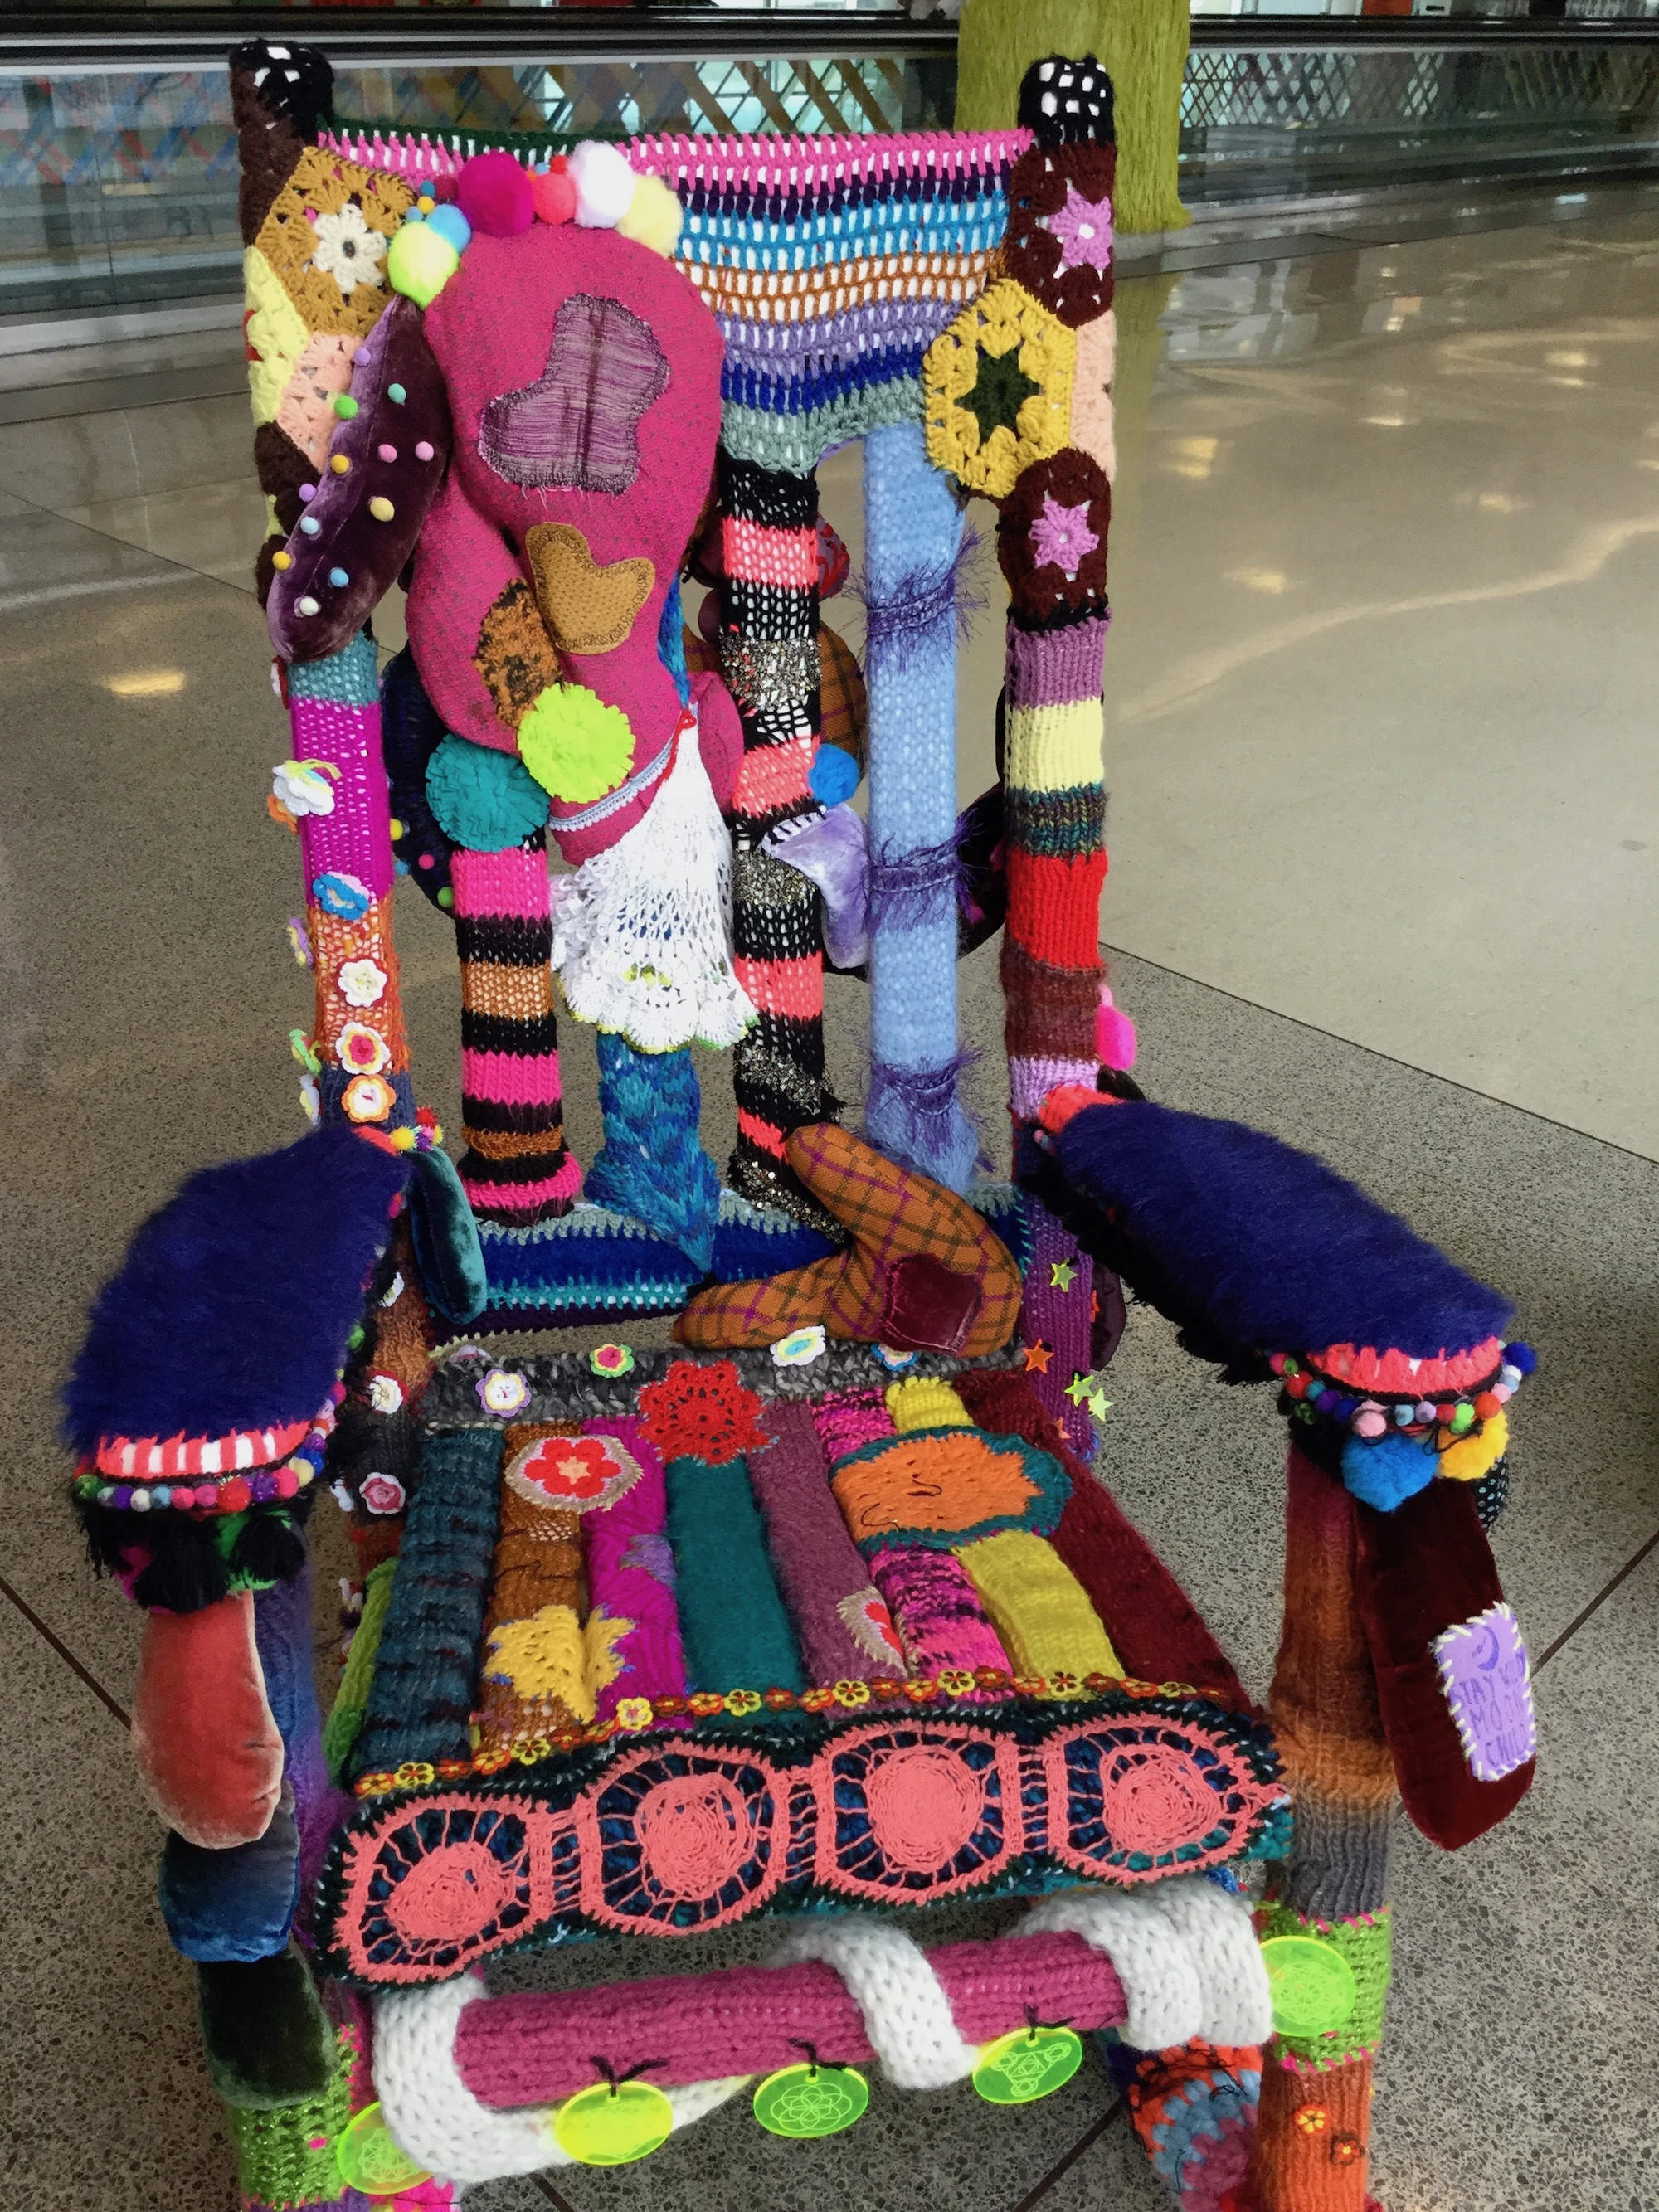 Art at the Airport, Angela McQuillan's embellished rocking chair, featured in "20 x 20"